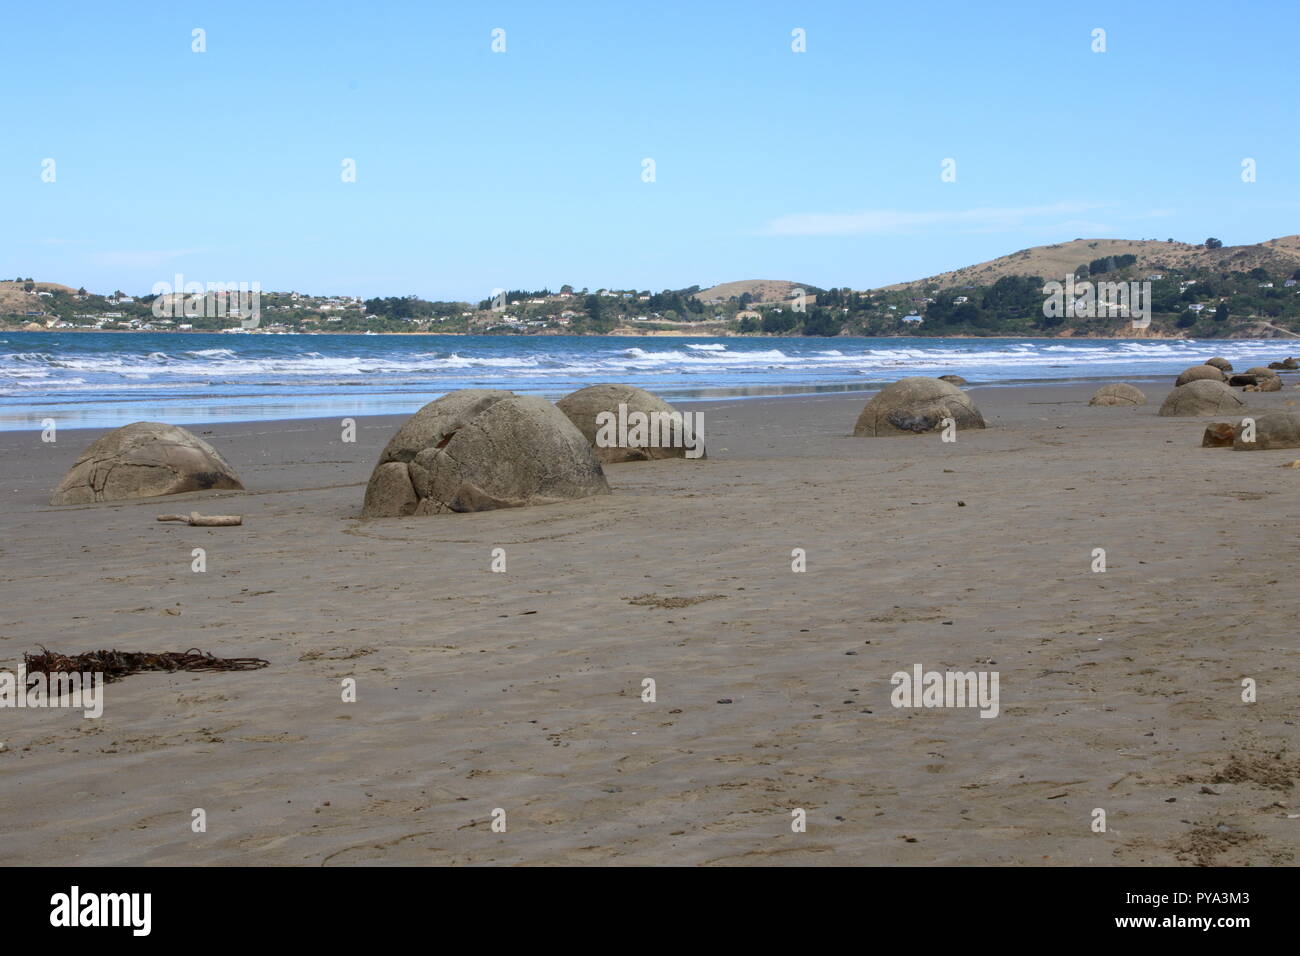 Moeraki beach looking across the bay with boulders in the foreground on the sandy tourist beach. Stock Photo